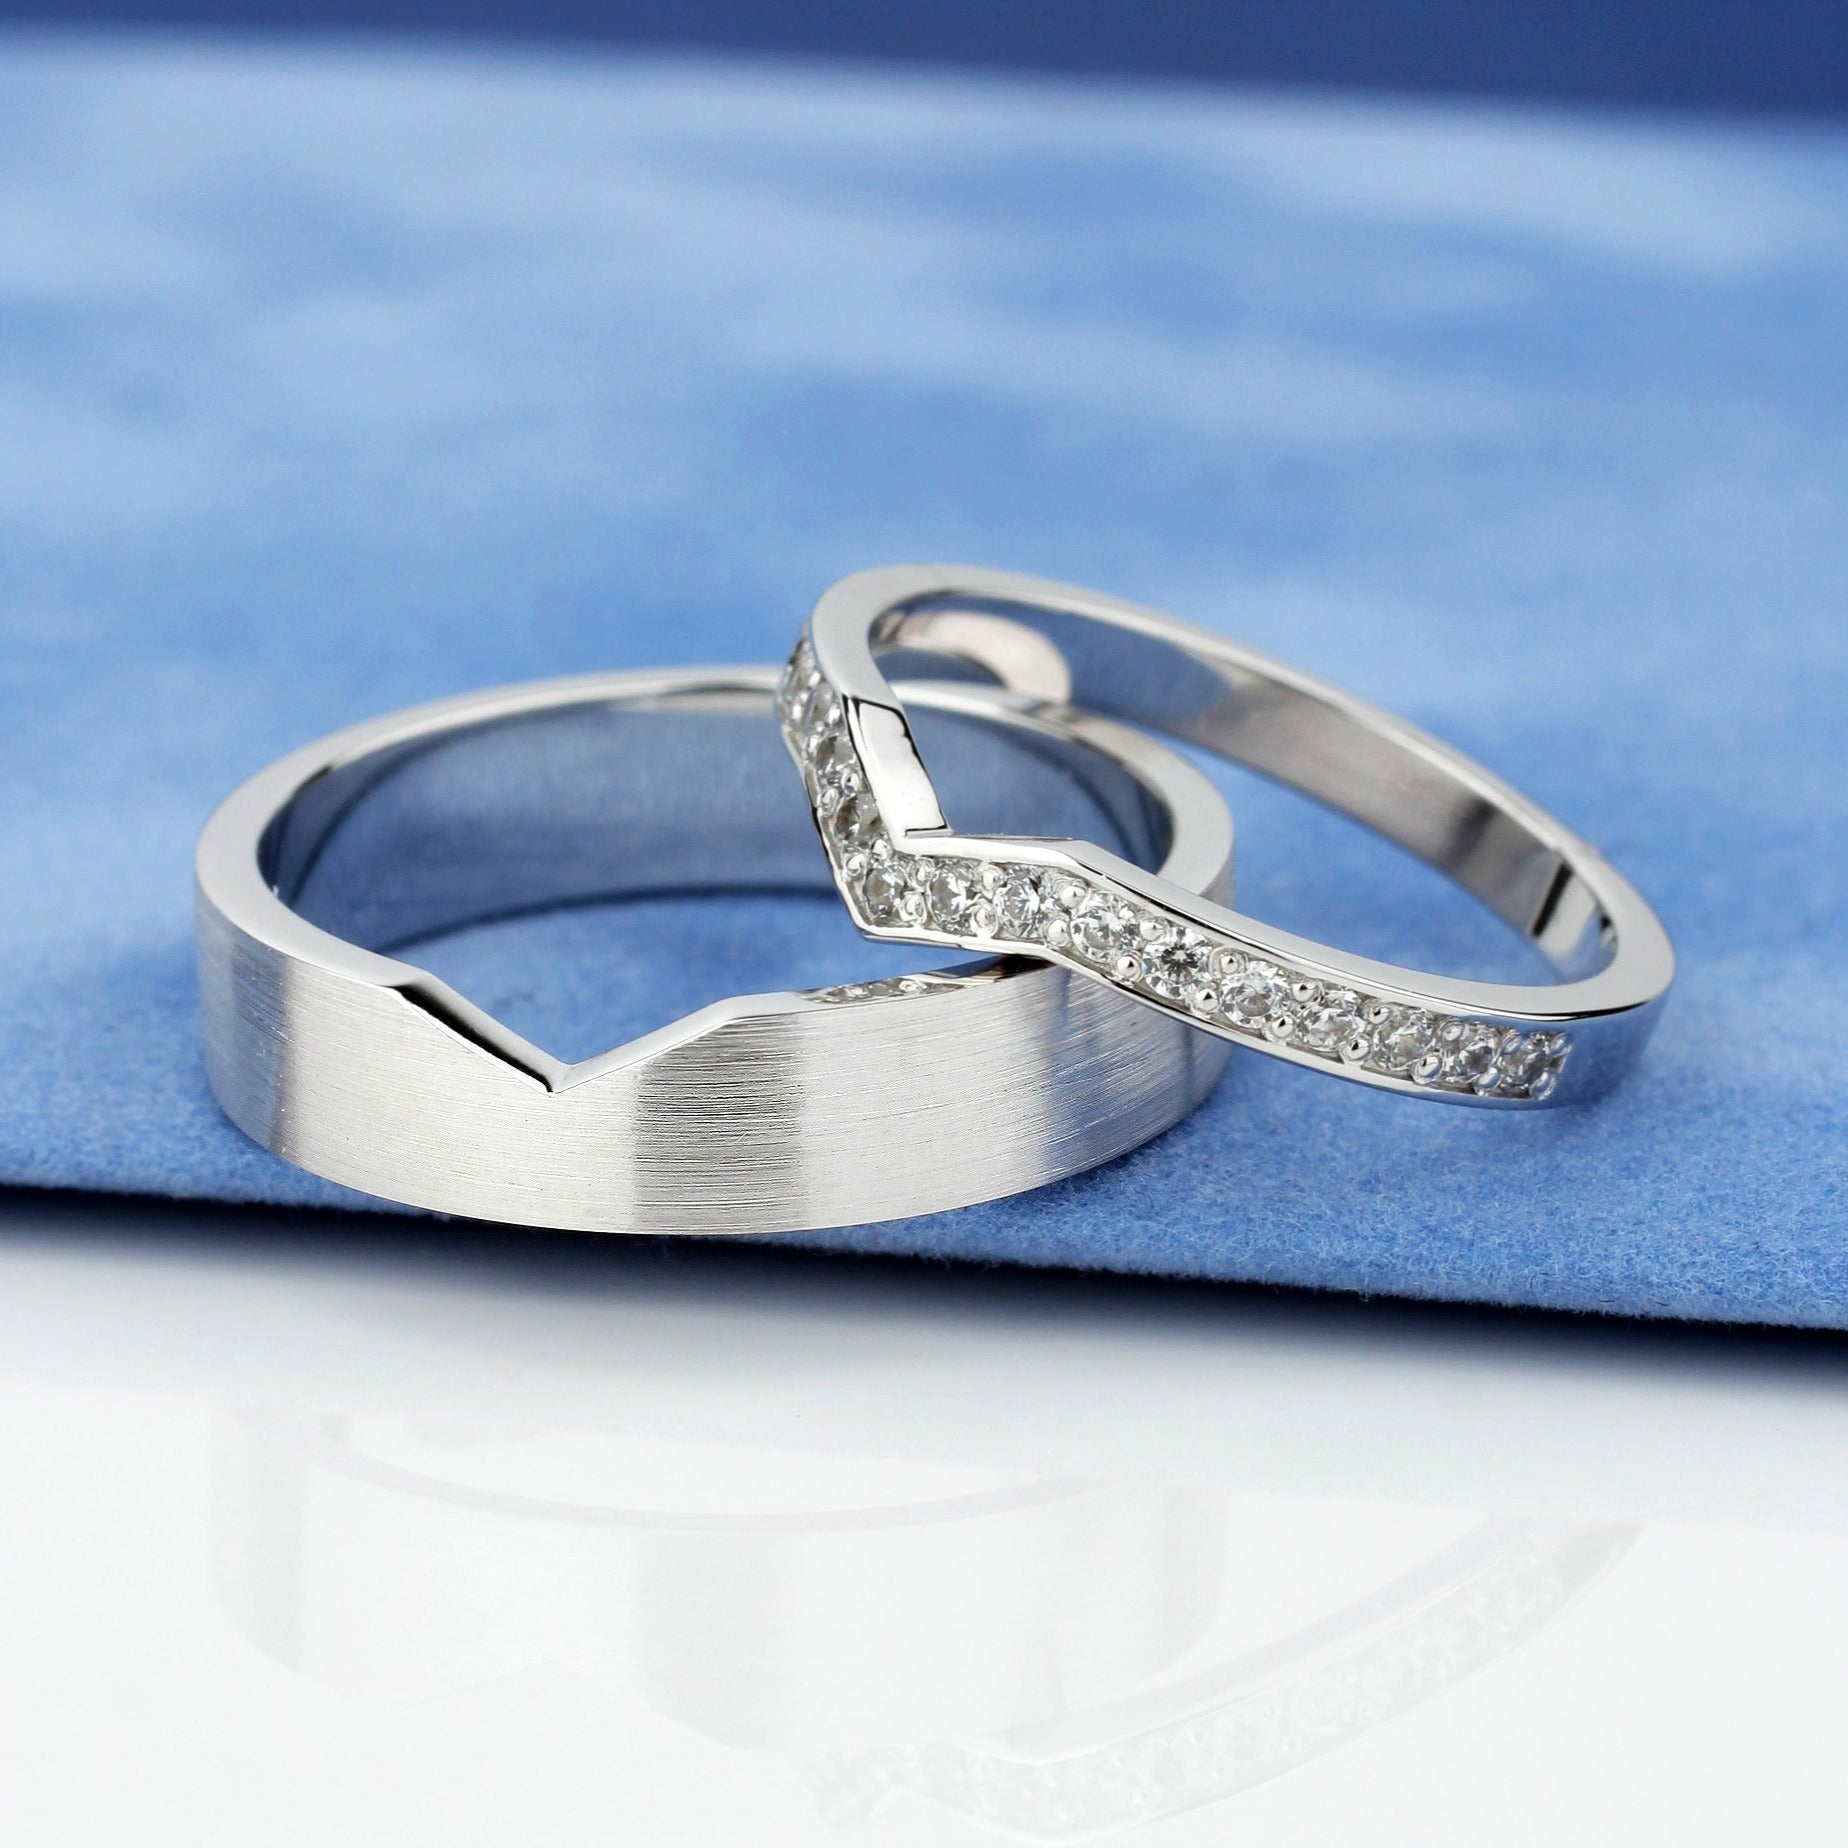 Unique matching wedding bands. His and hers wedding rings. Gold wedding bands with diamonds. Couple wedding bands. Wedding rings sets. Gold wedding rings with diamonds. Unique gold bands. Matching gold bands